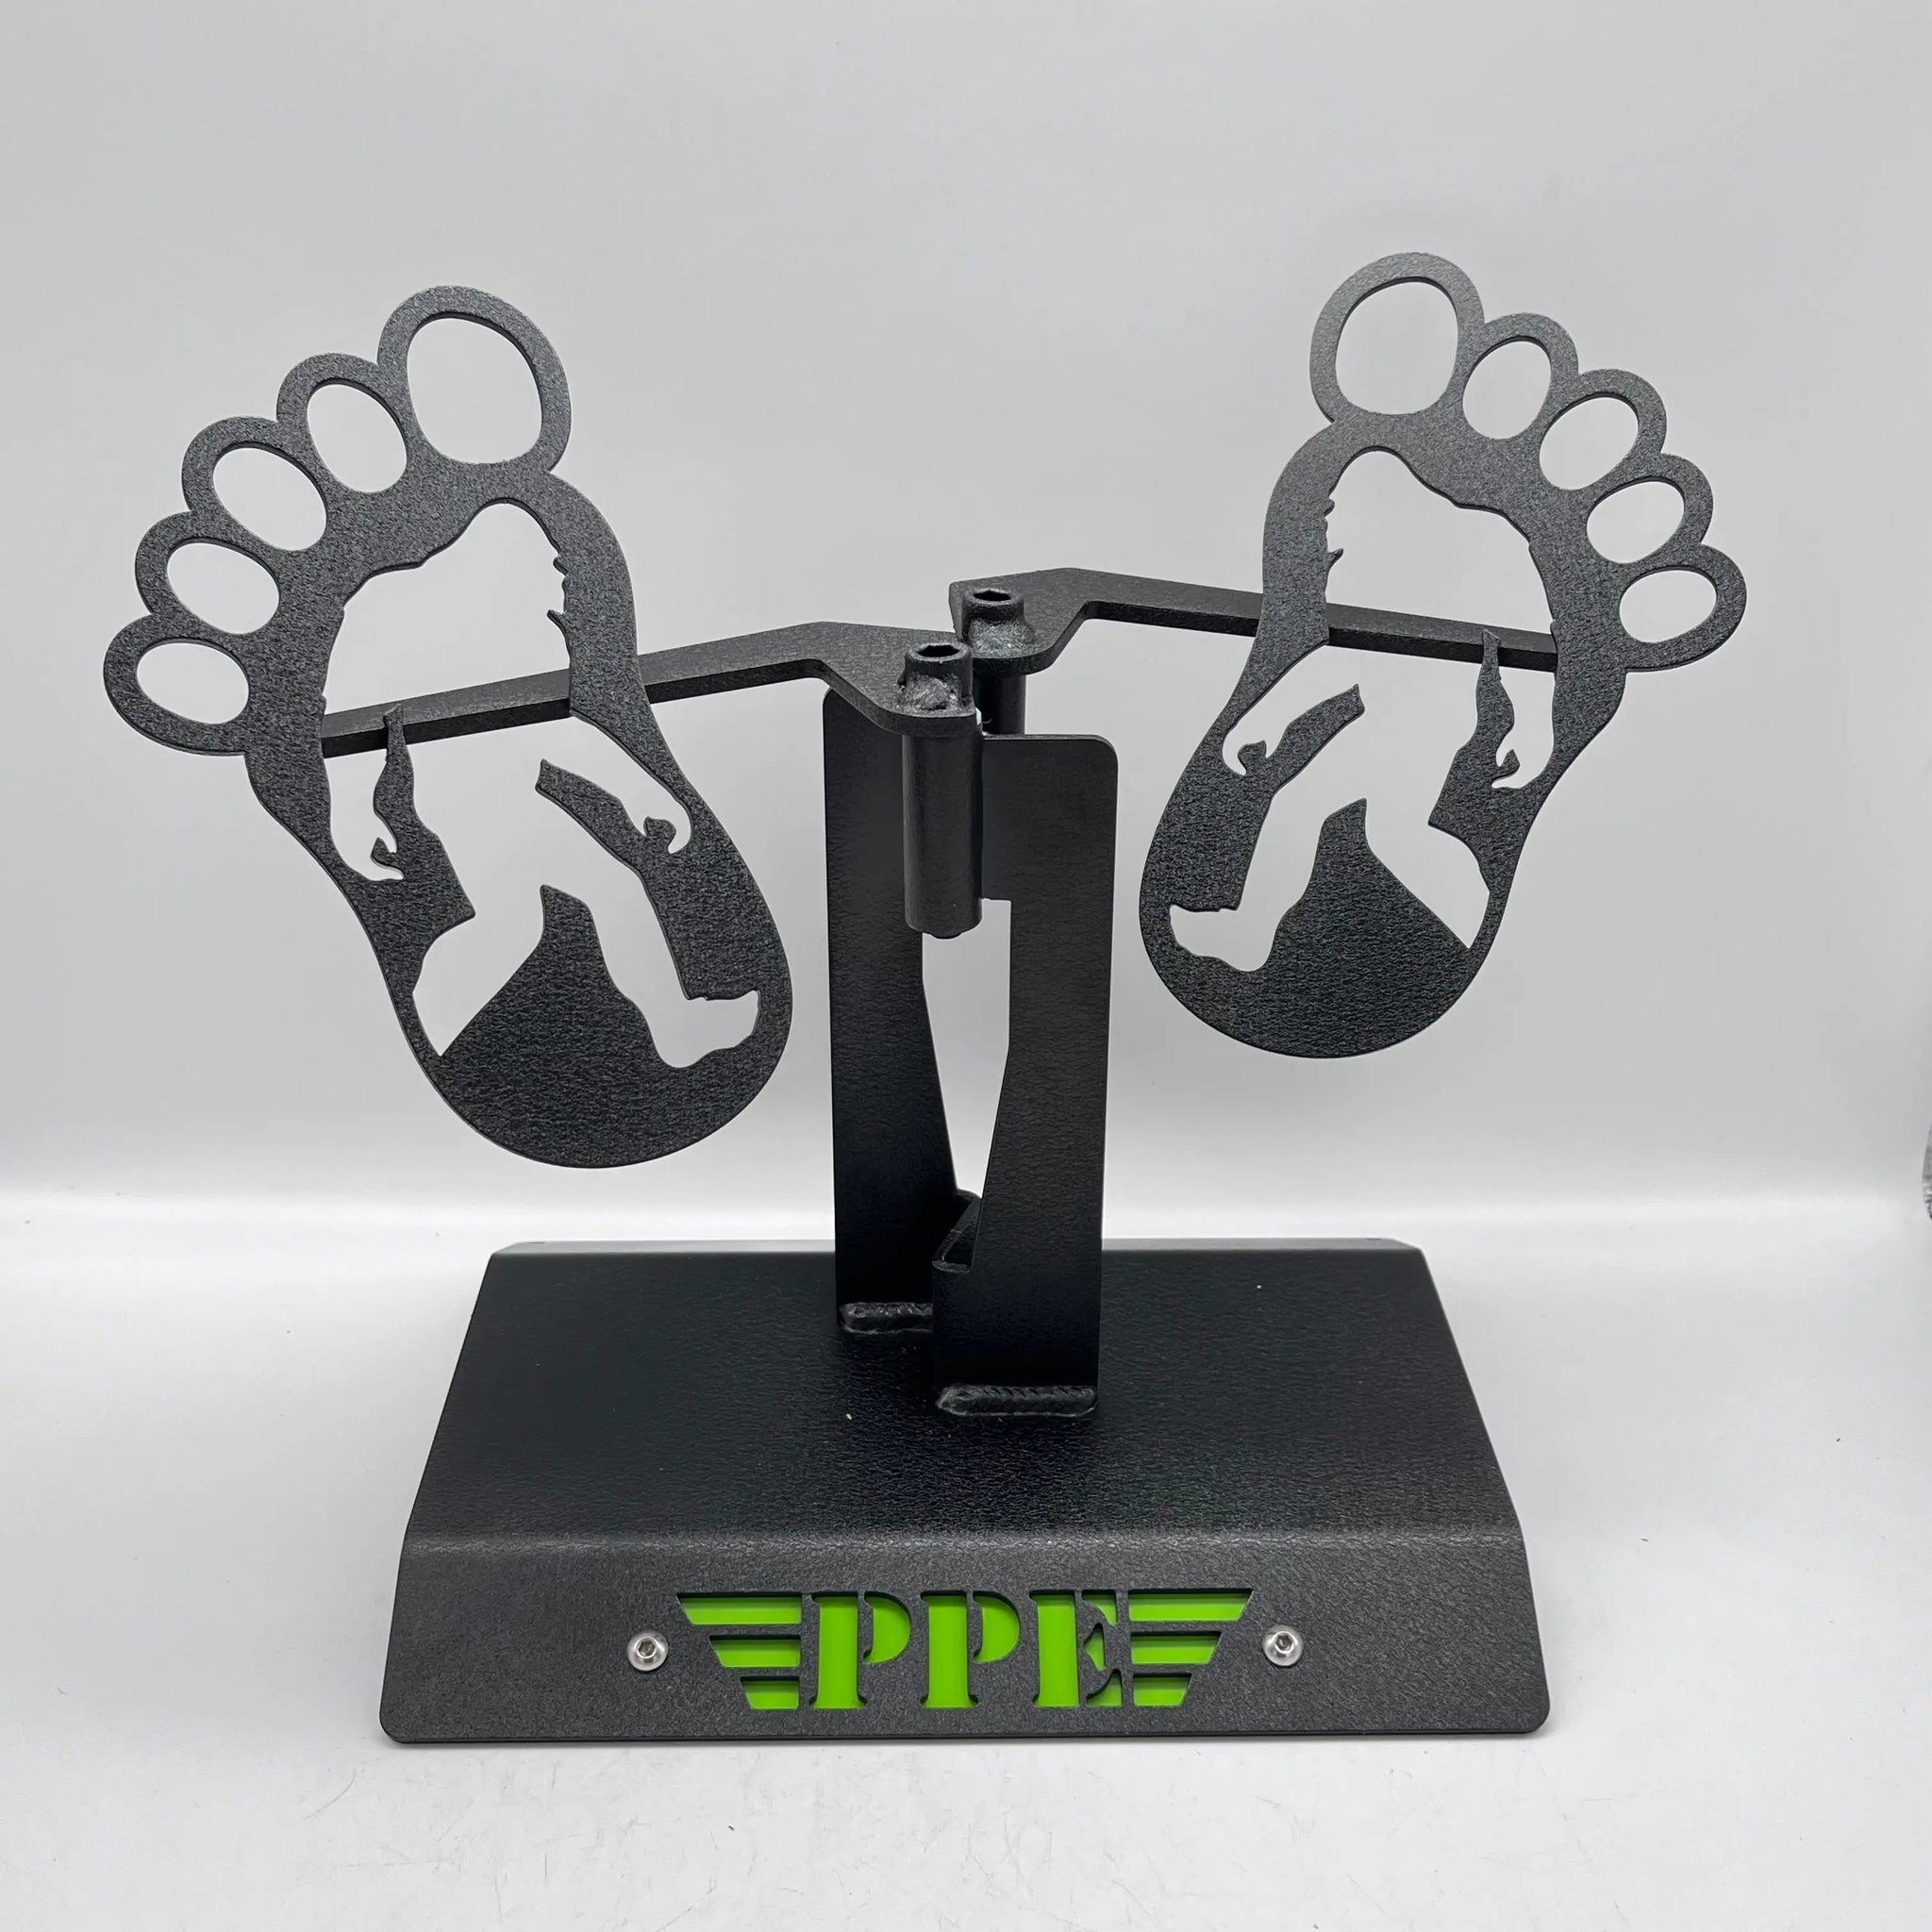 Yeti footprint foot pegs for Wrangler and Gladiator